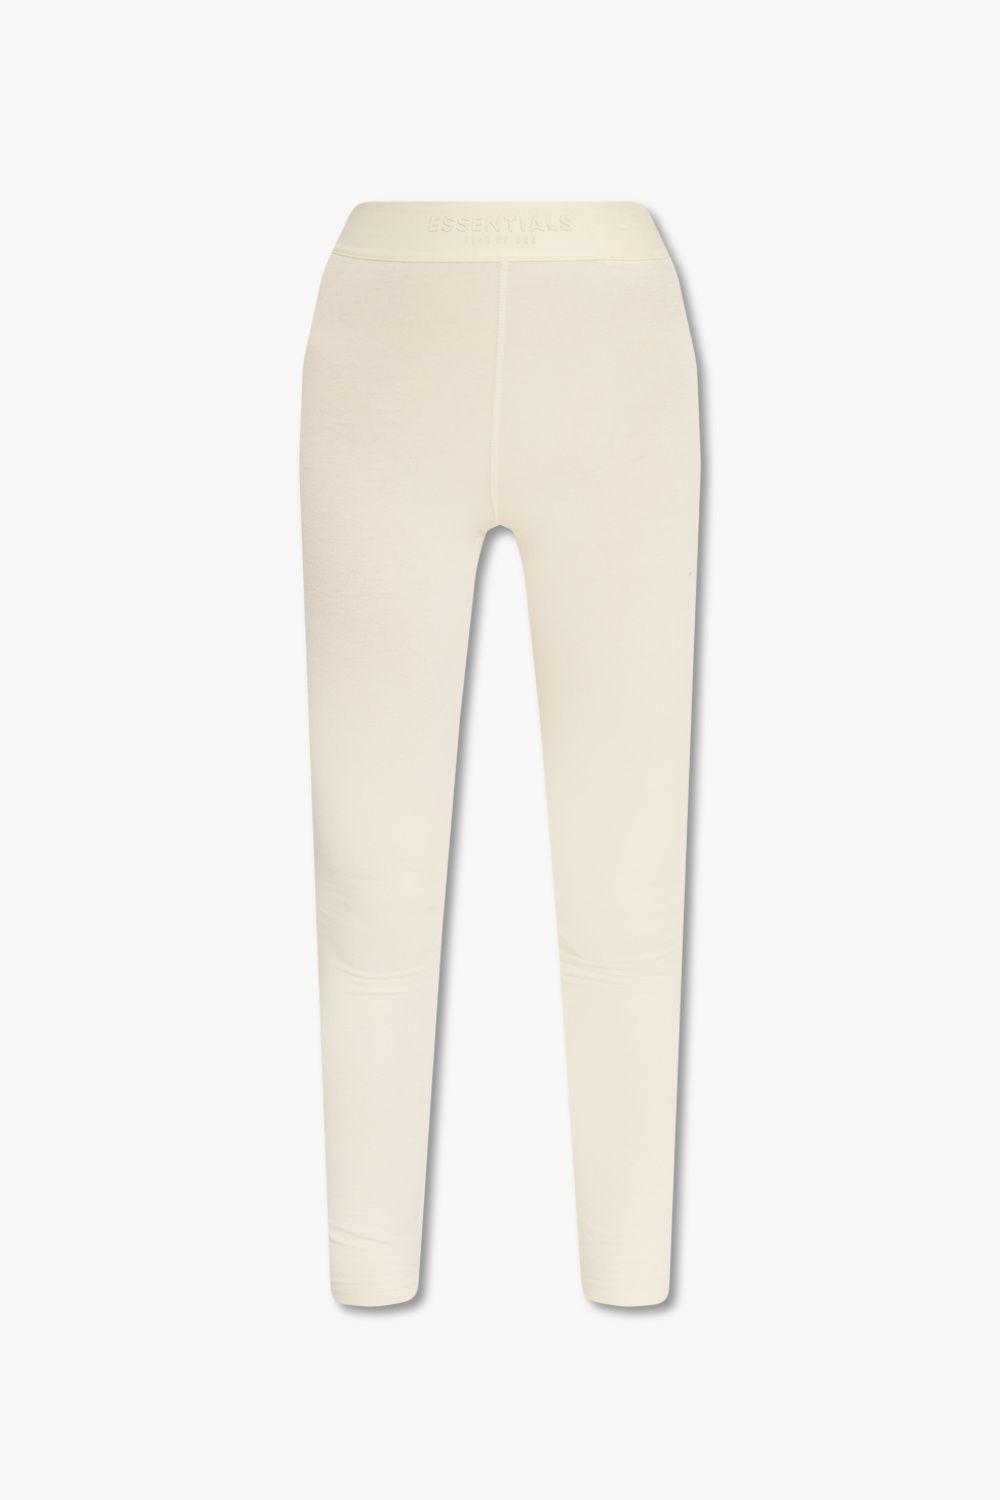 Fear of God ESSENTIALS Short Leggings With Logo in White | Lyst